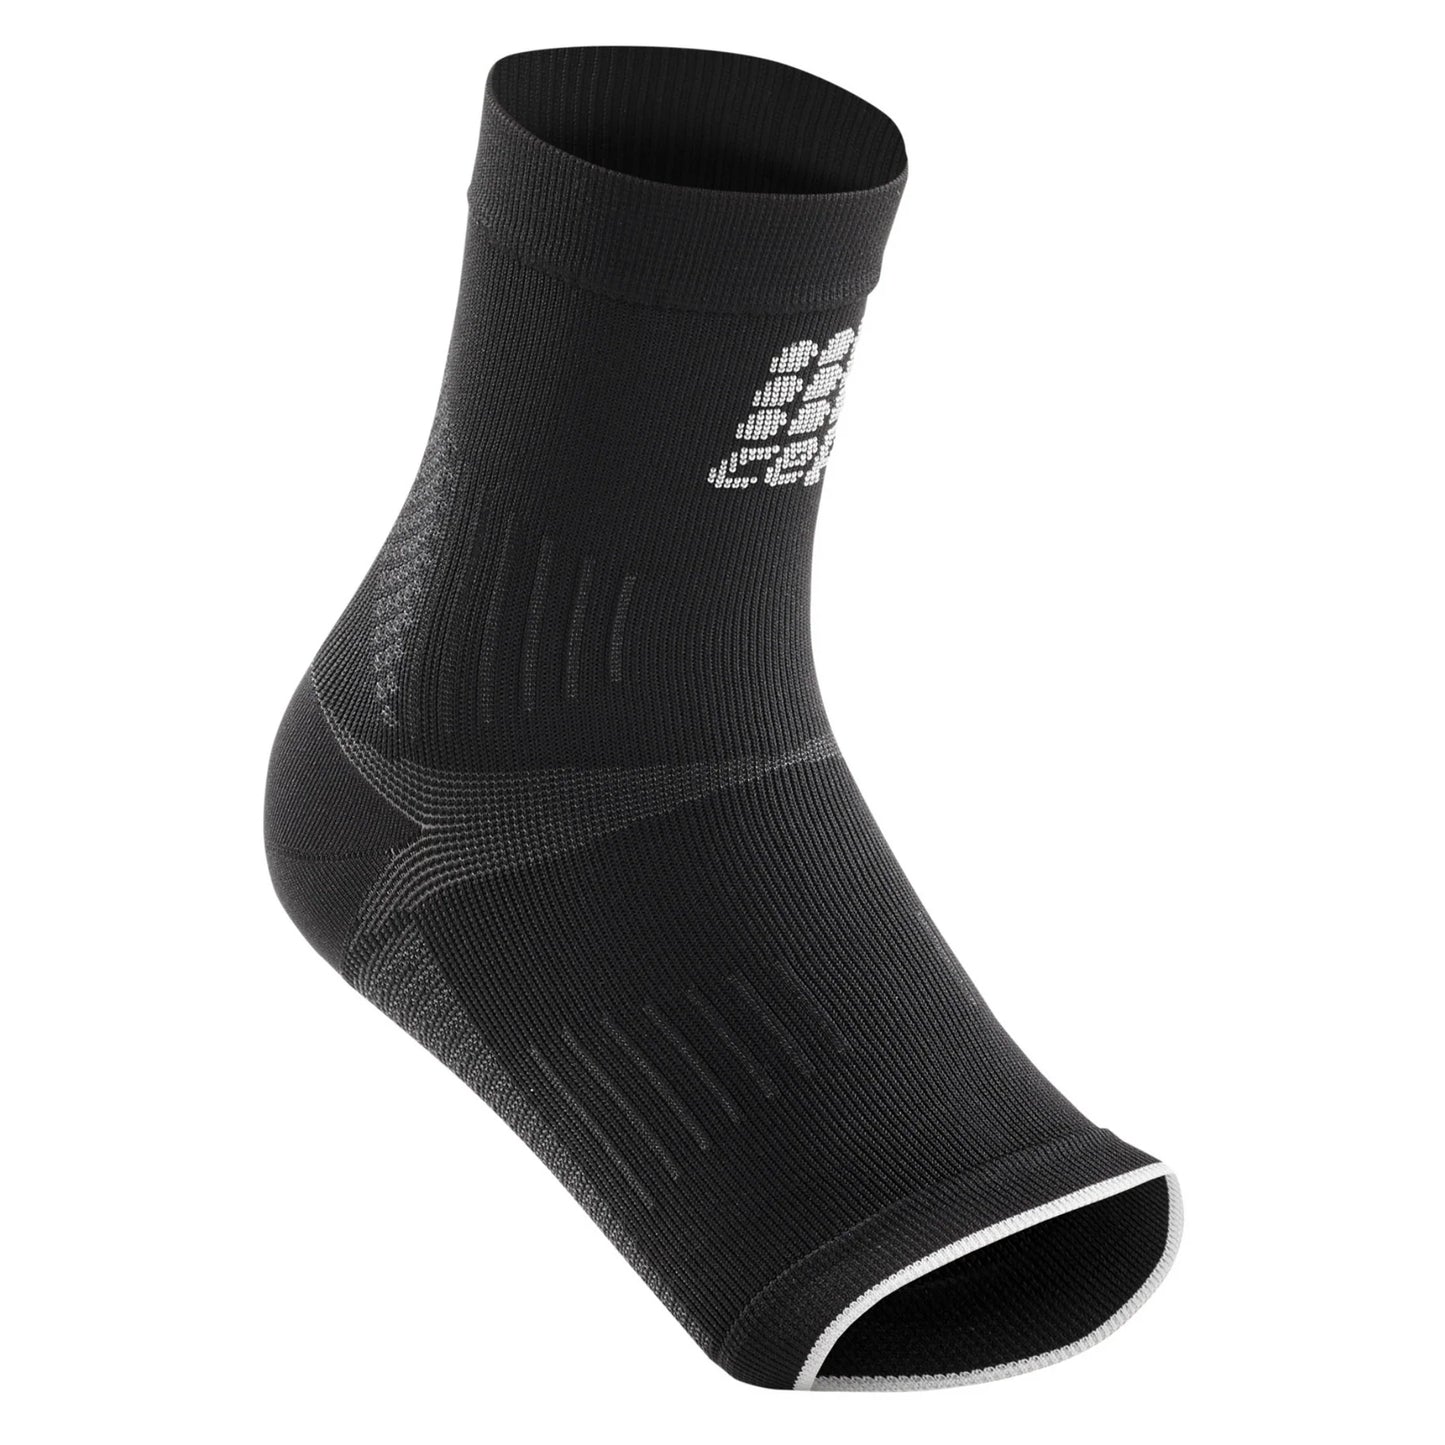 CEP Mid Support Plantar Fasciitis Compression Sleeves